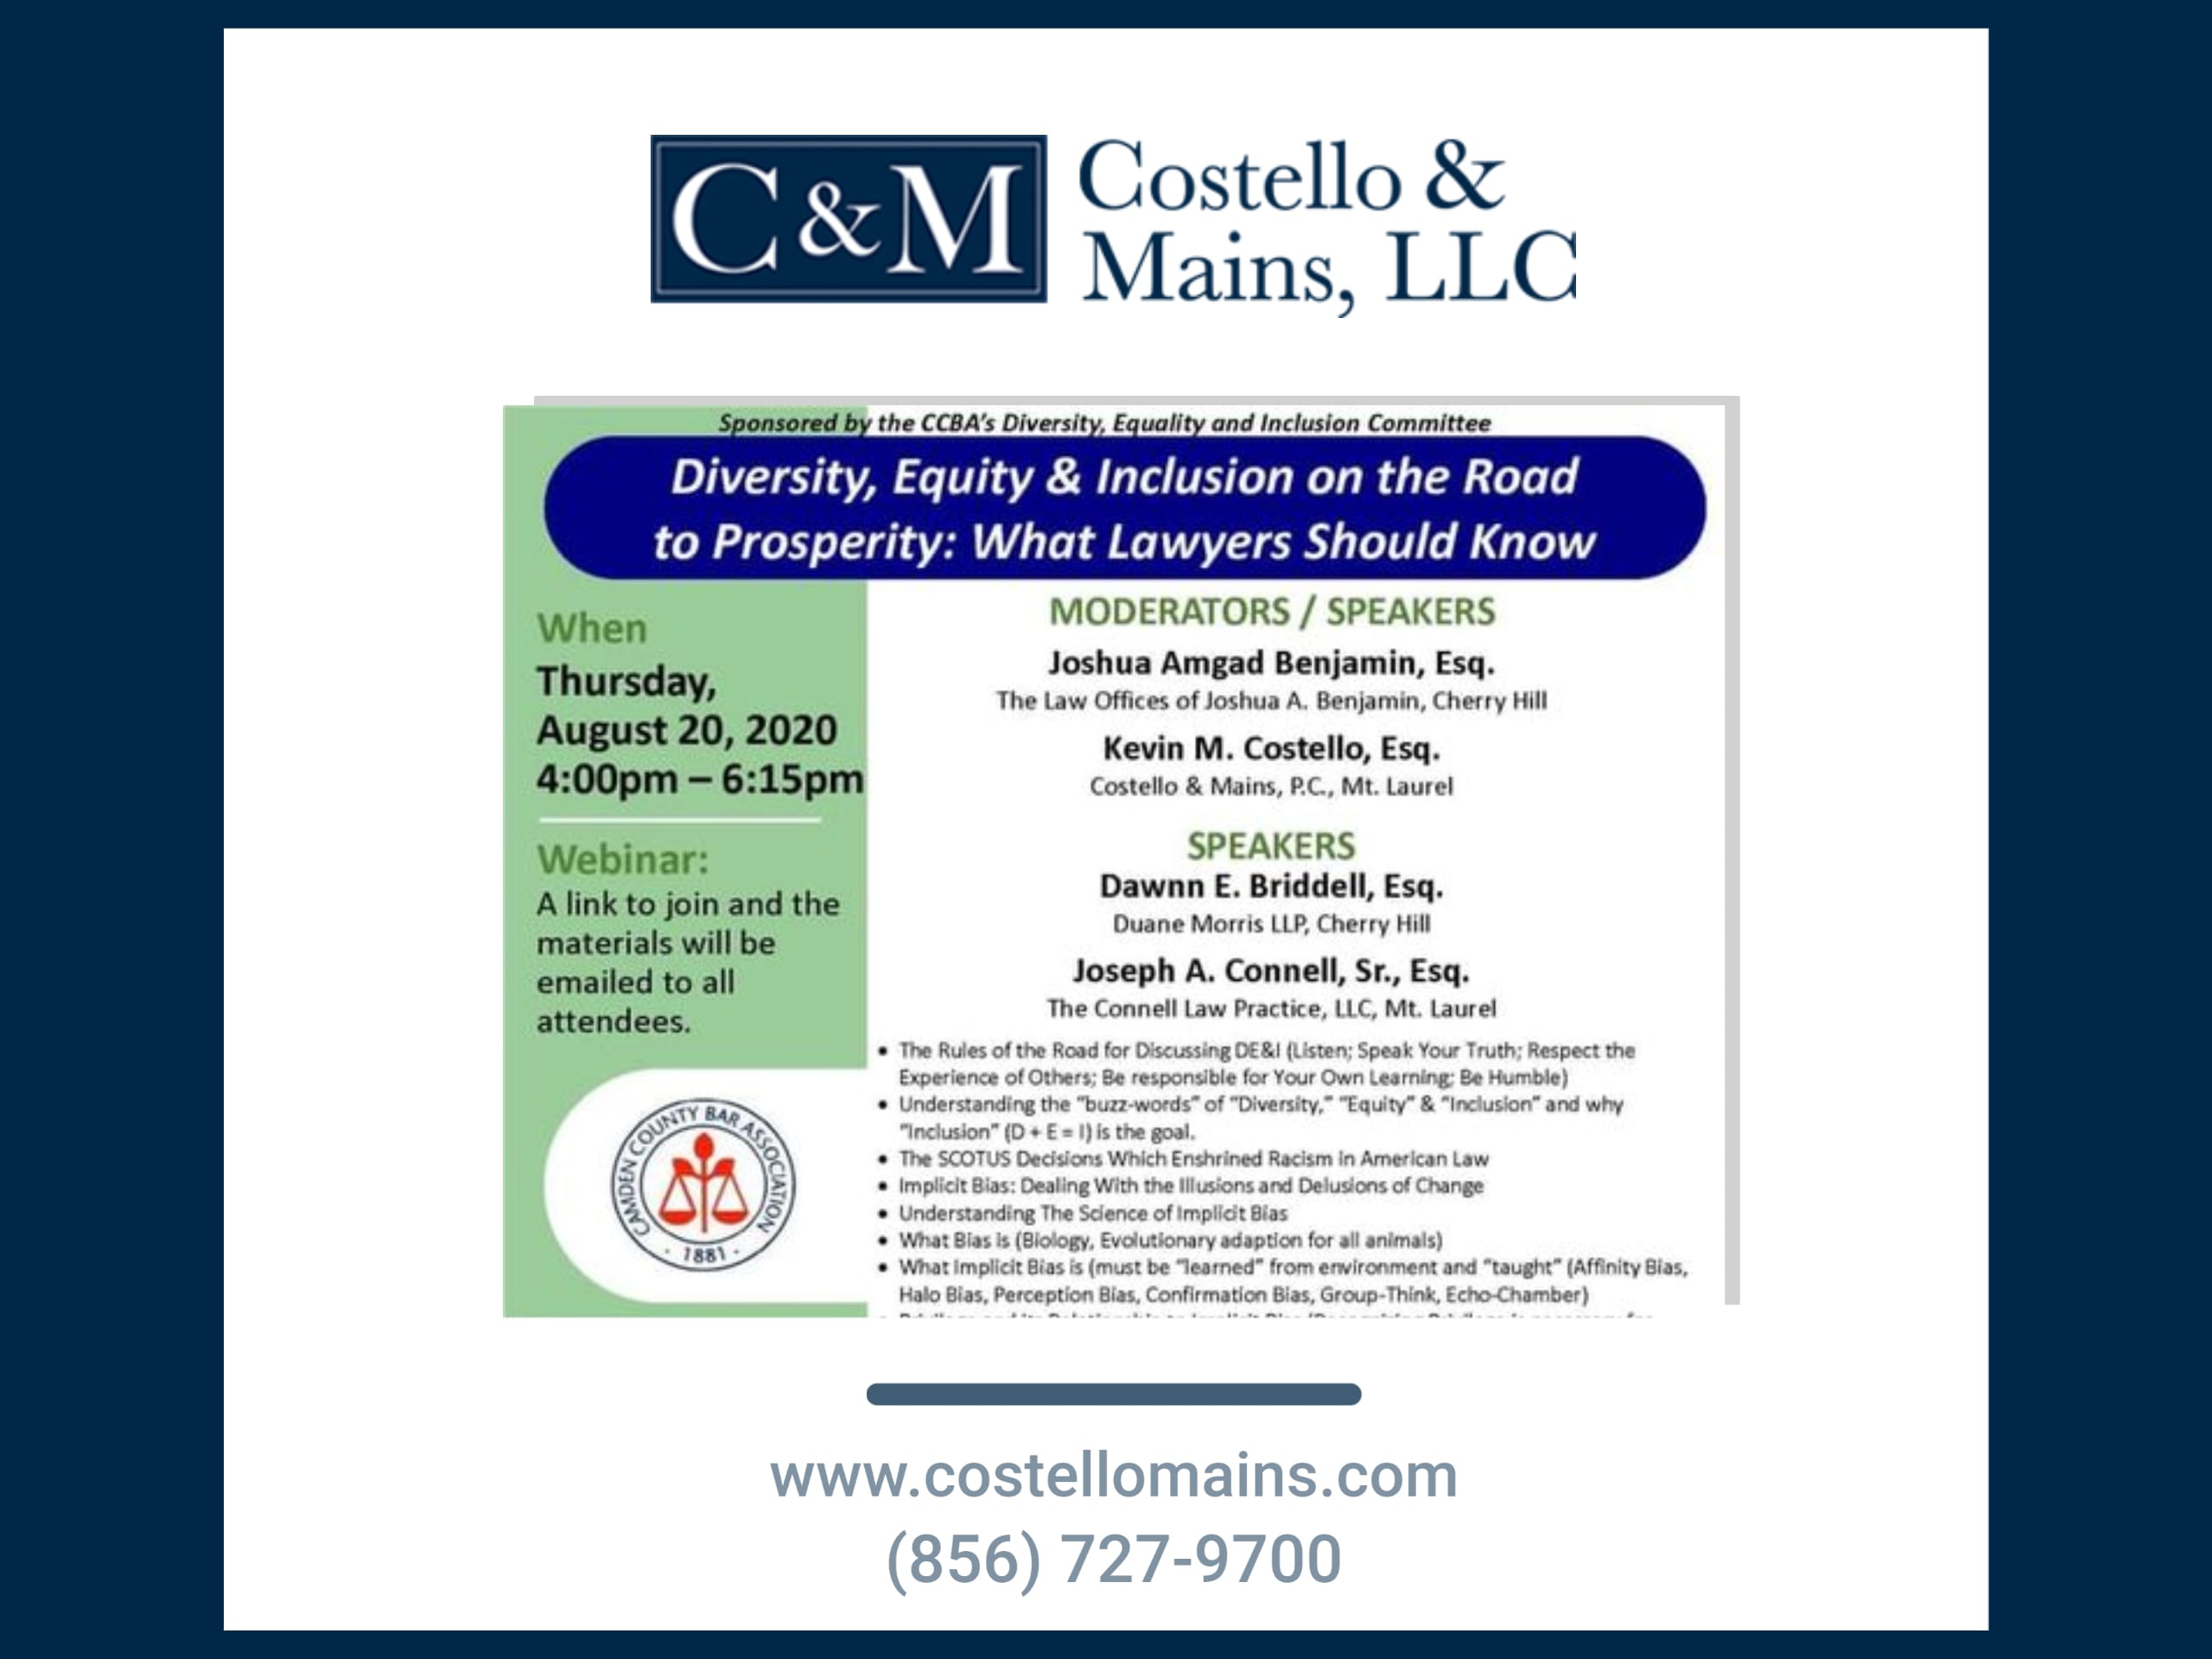 Costello & Mains, LLC | Diversity, equity & inclusion on the road to prosperity: what lawyers should know